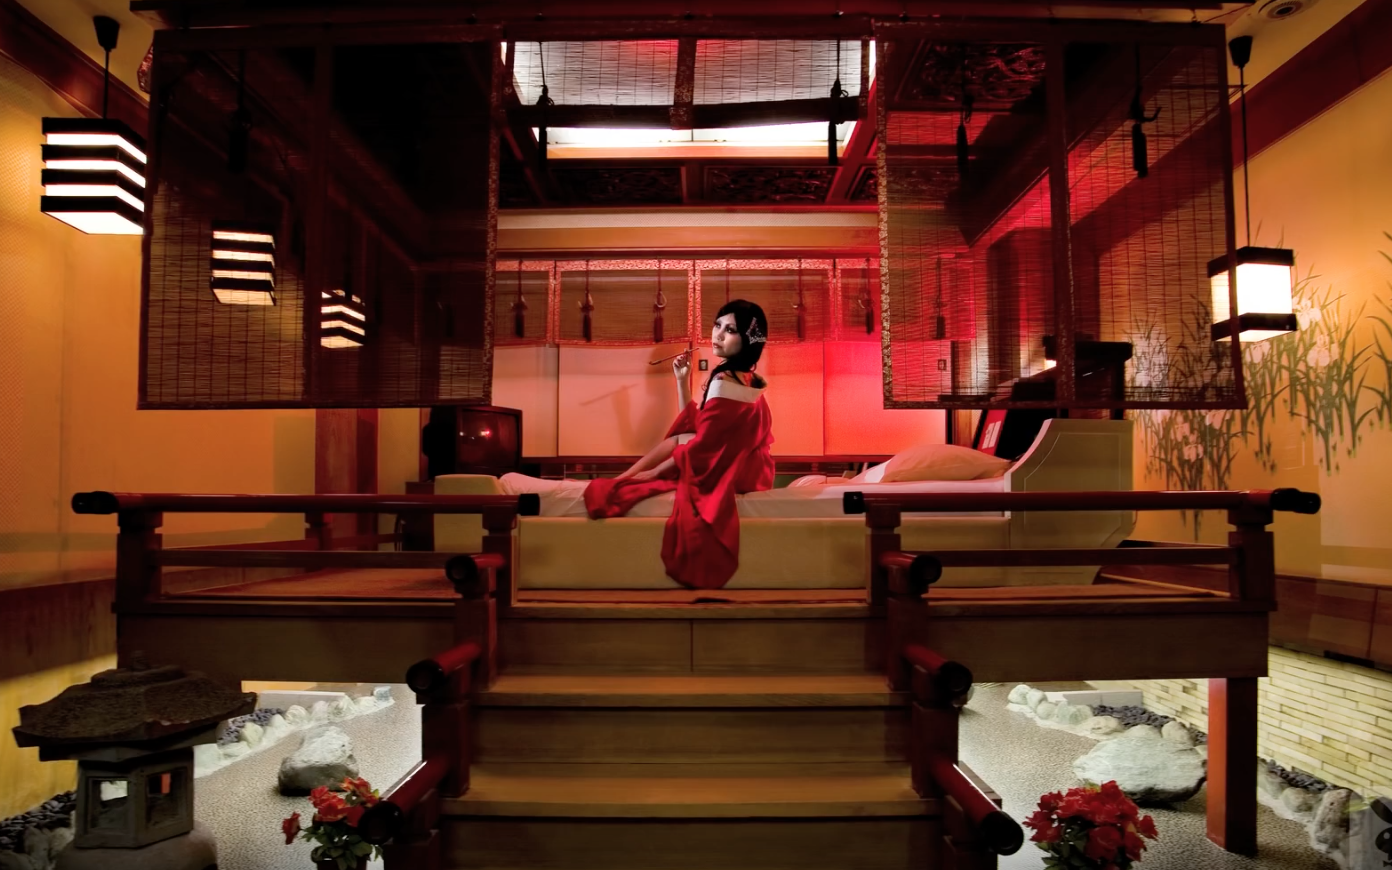 Live out your fantasies of love-making in Japan’s bygone eras at this unusu...